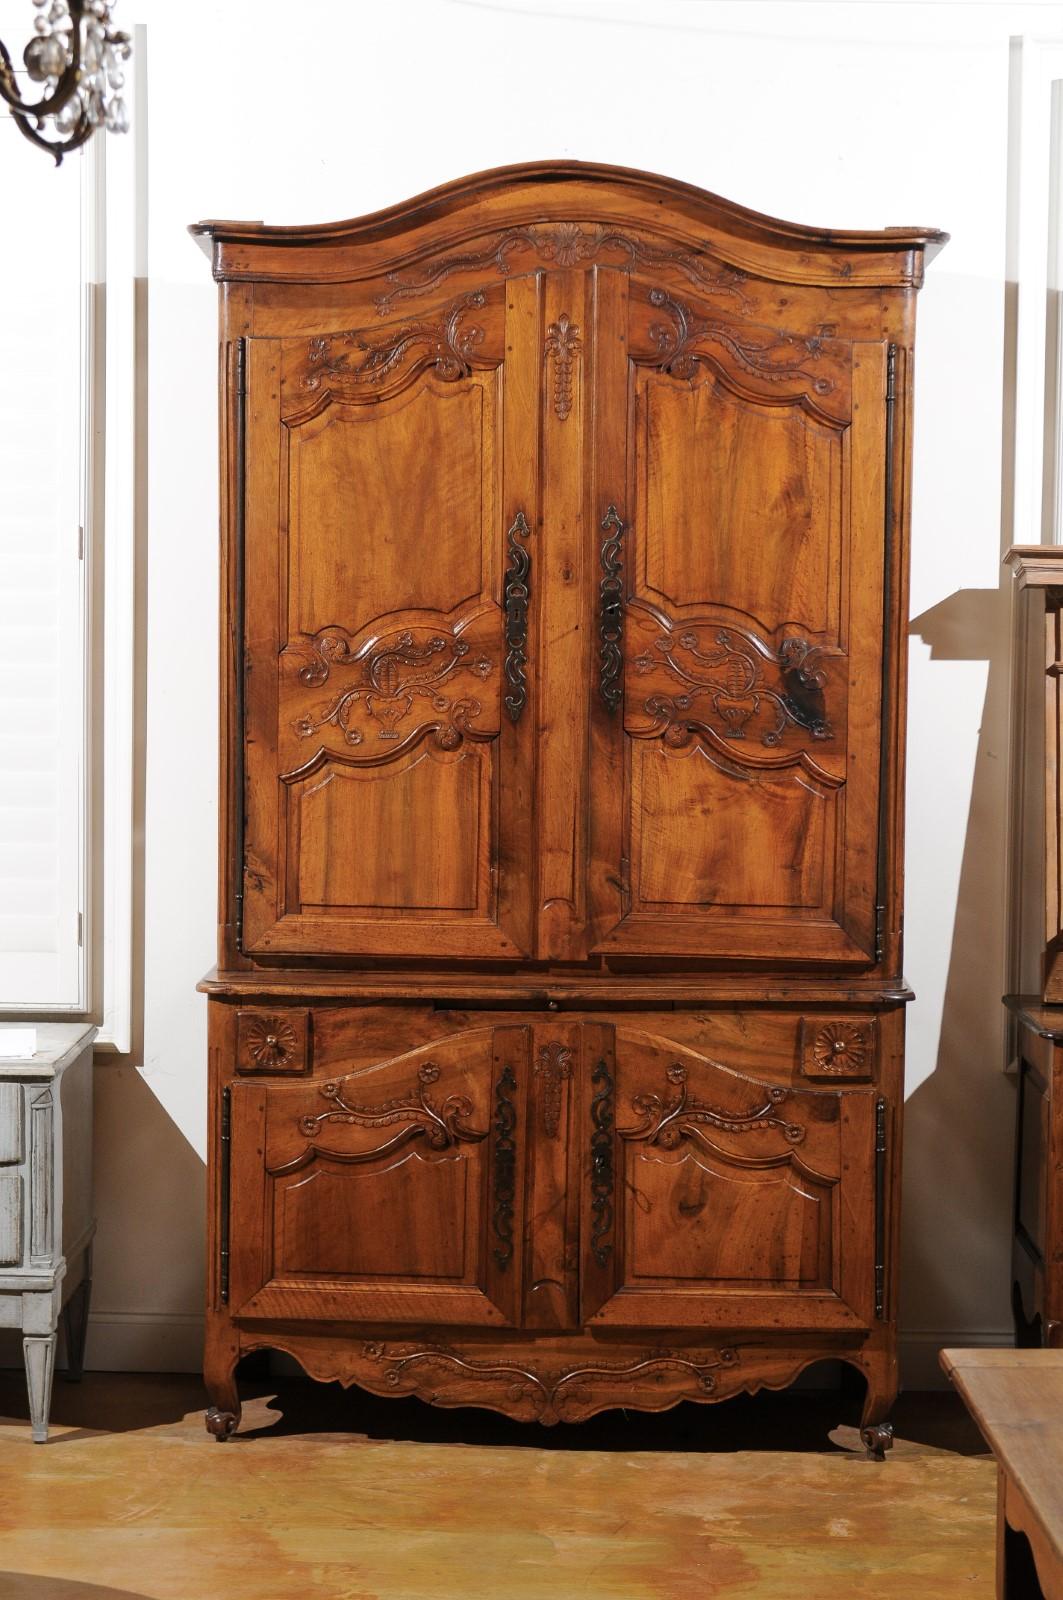 A French Louis XV period mid-18th century walnut buffet à deux-corps from the Loire Valley with bonnet top. Born in the exquisite Loire Valley region that shelters some of the most amazing Renaissance chateaux of France, this walnut buffet à